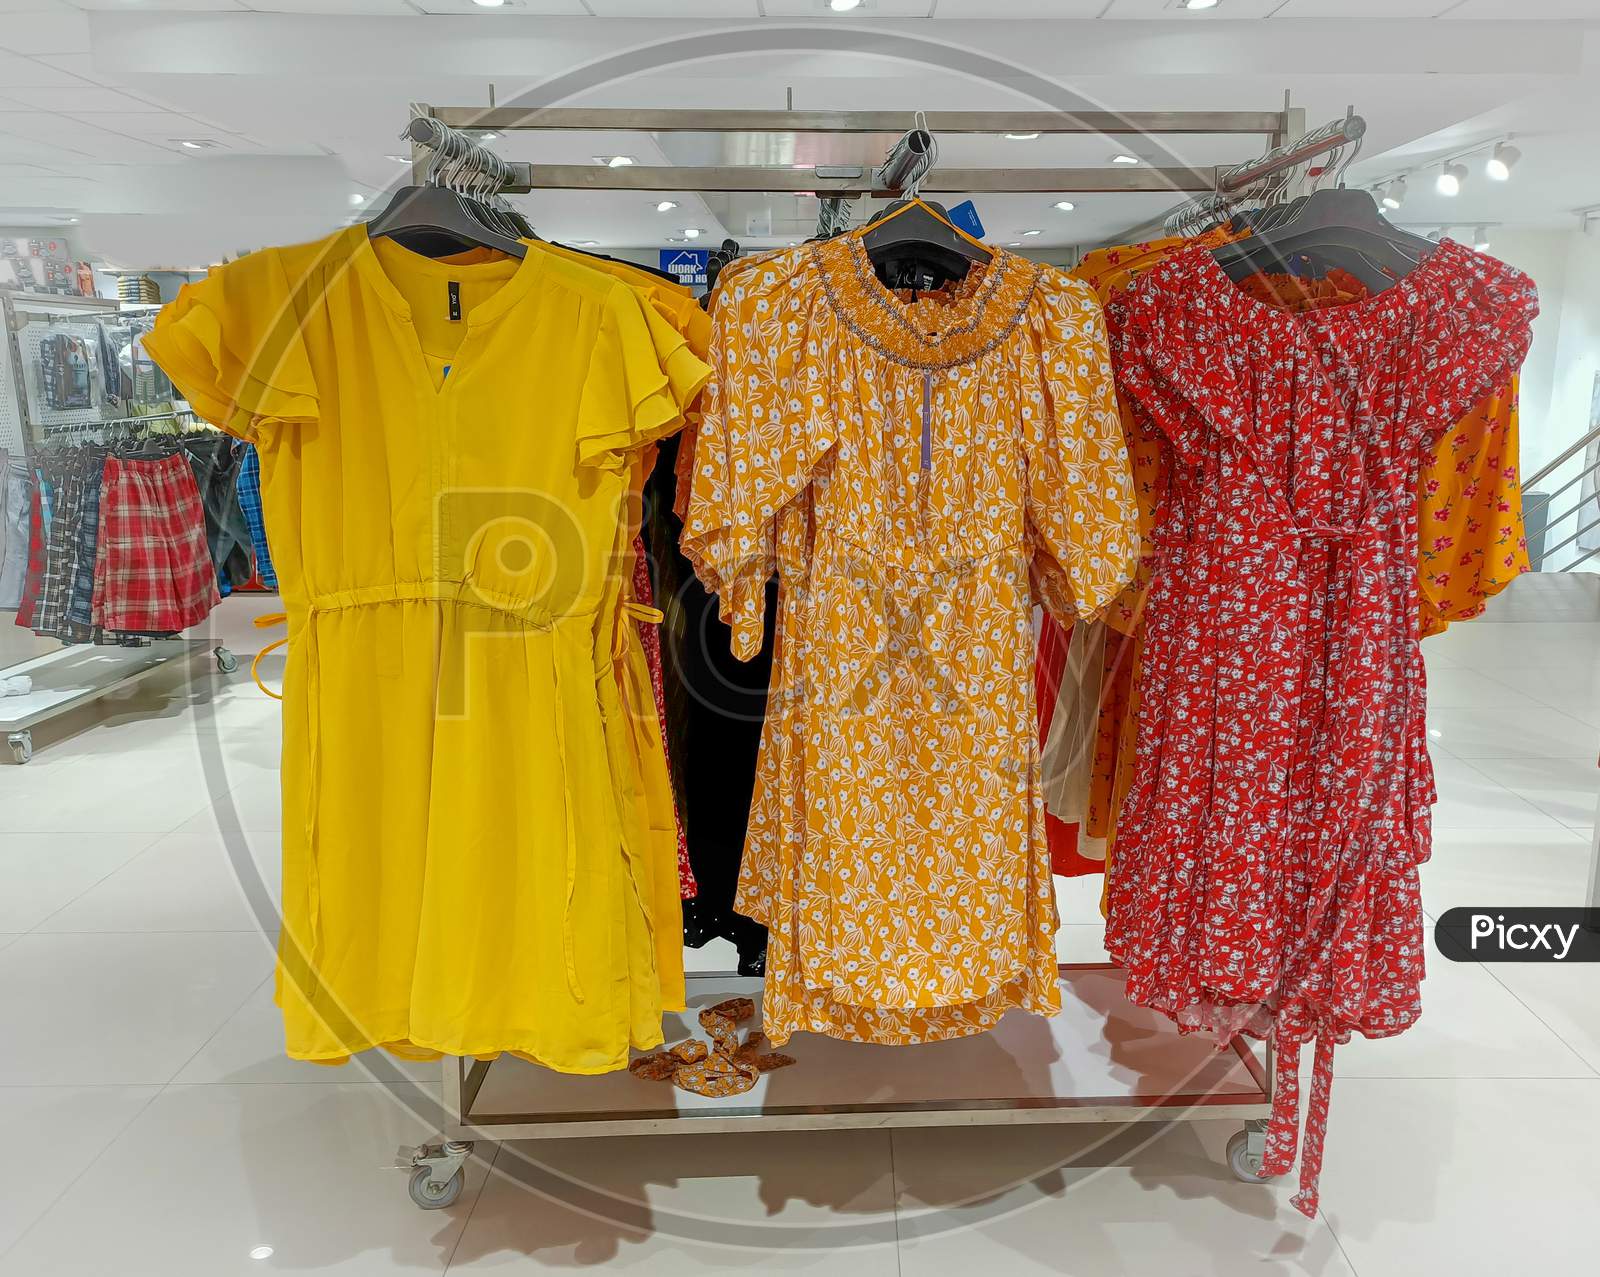 An Eye catching picture of traditional Ladies Indian Kurtis in different Colors and Designs at a Fashion store in Mysuru city of Karnataka state in India.